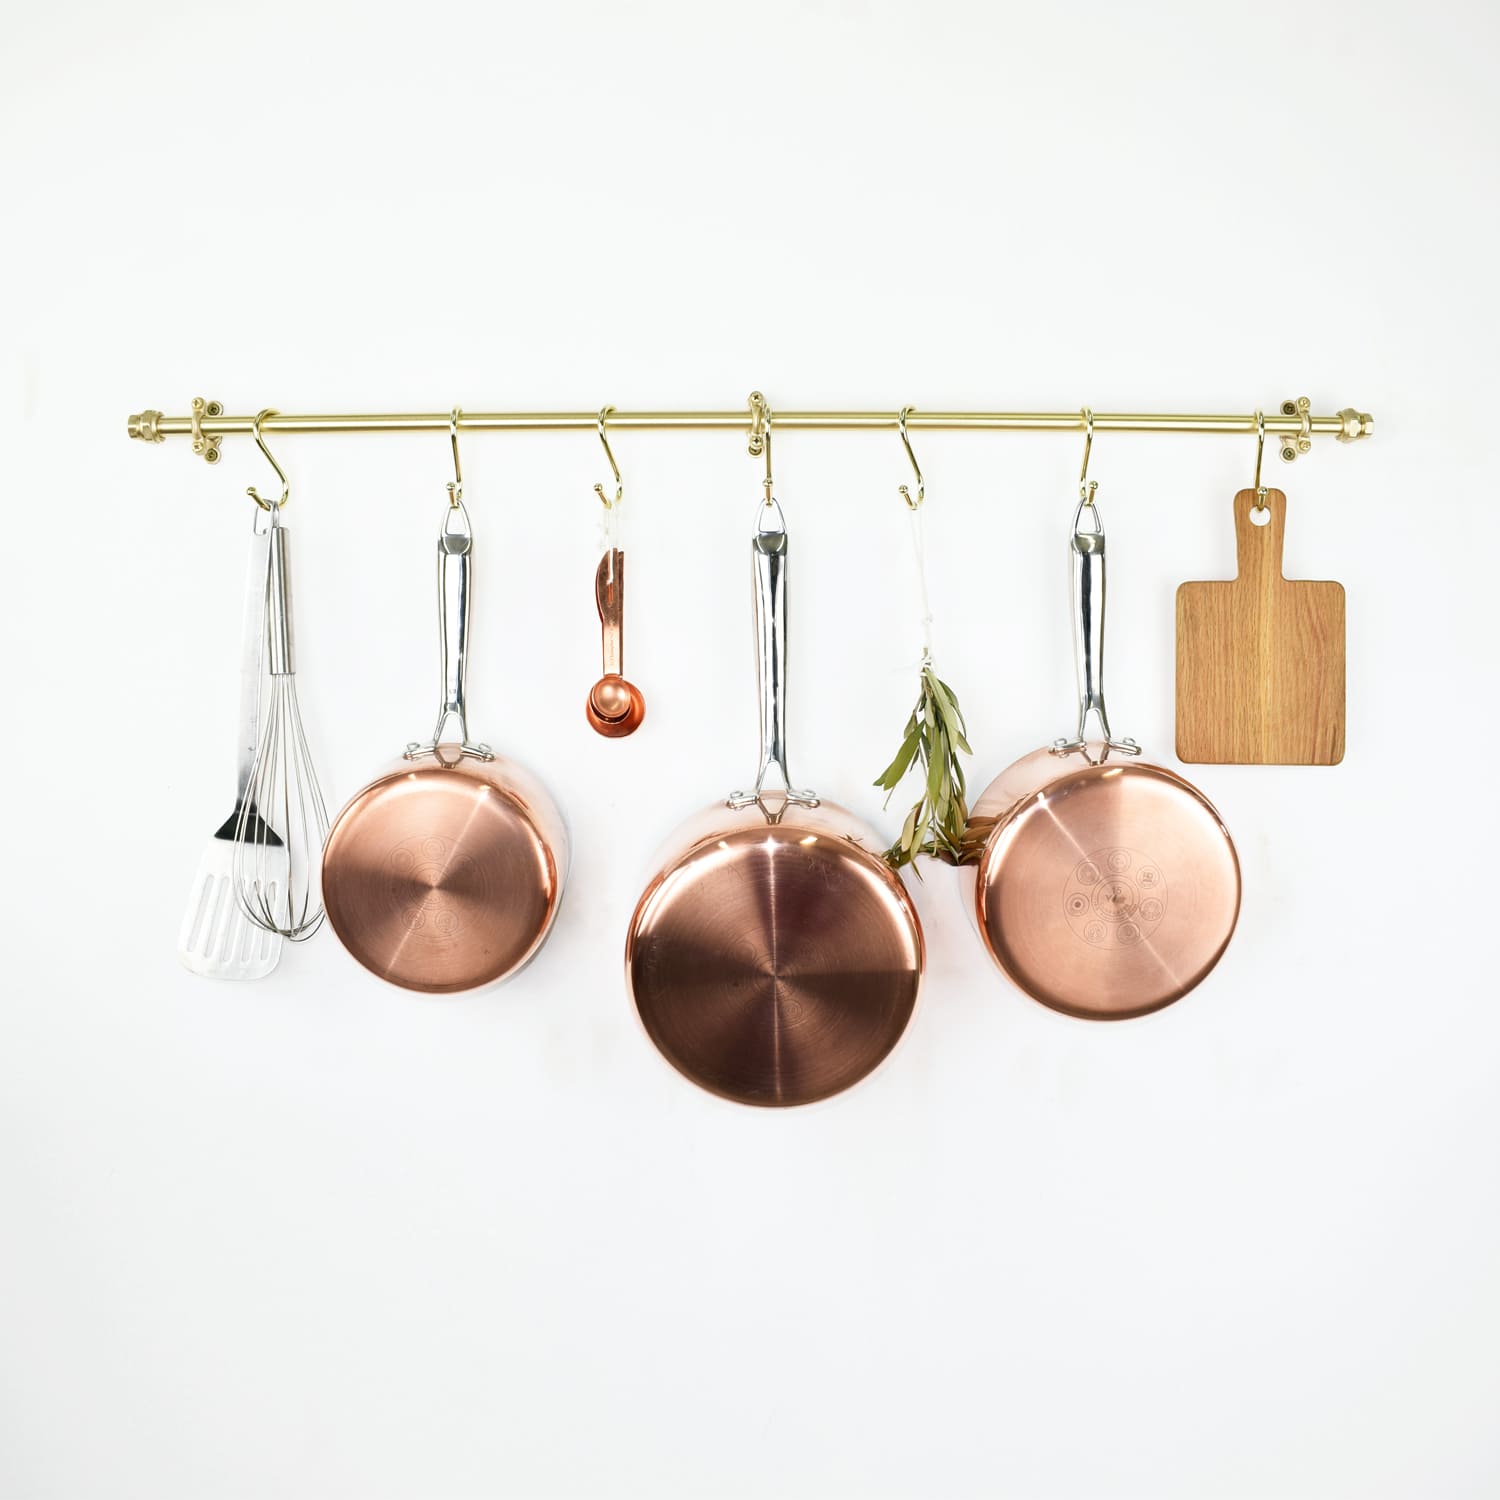 Wall Mounted Solid Brass Pan Rail - 15mm - Proper Copper Design